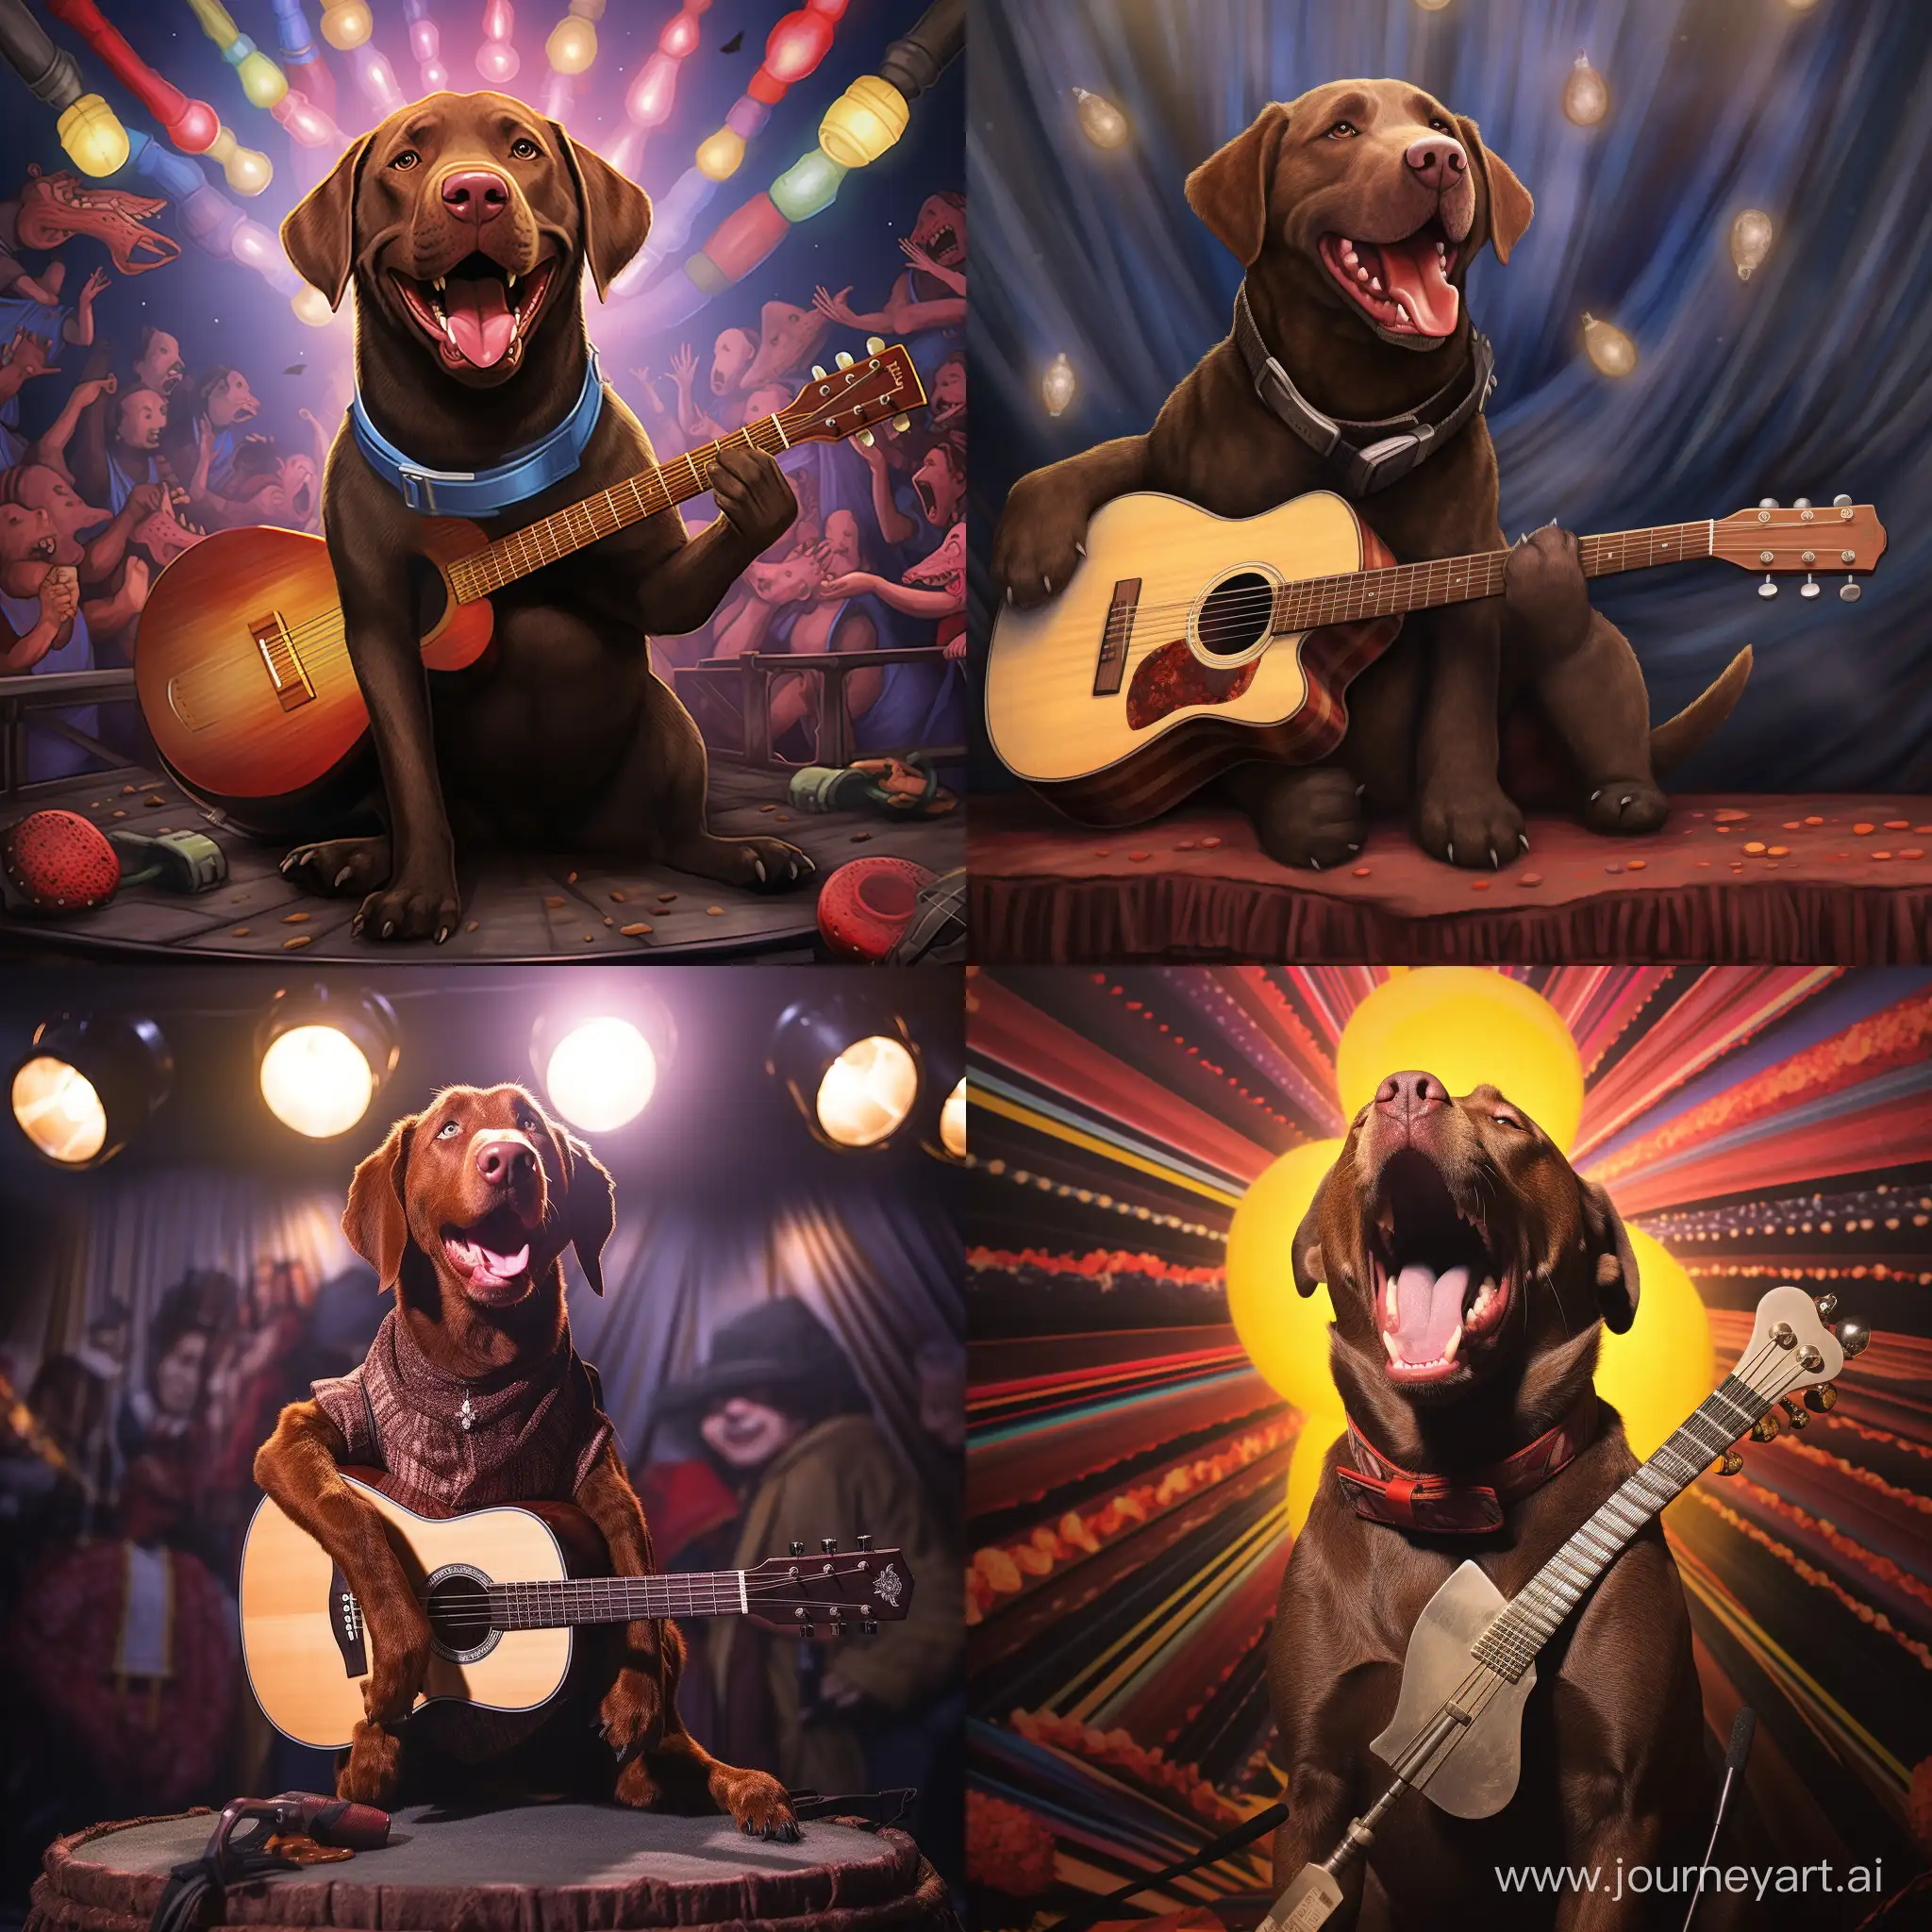 Chocolate-Lab-Performing-Musical-Act-on-Stage